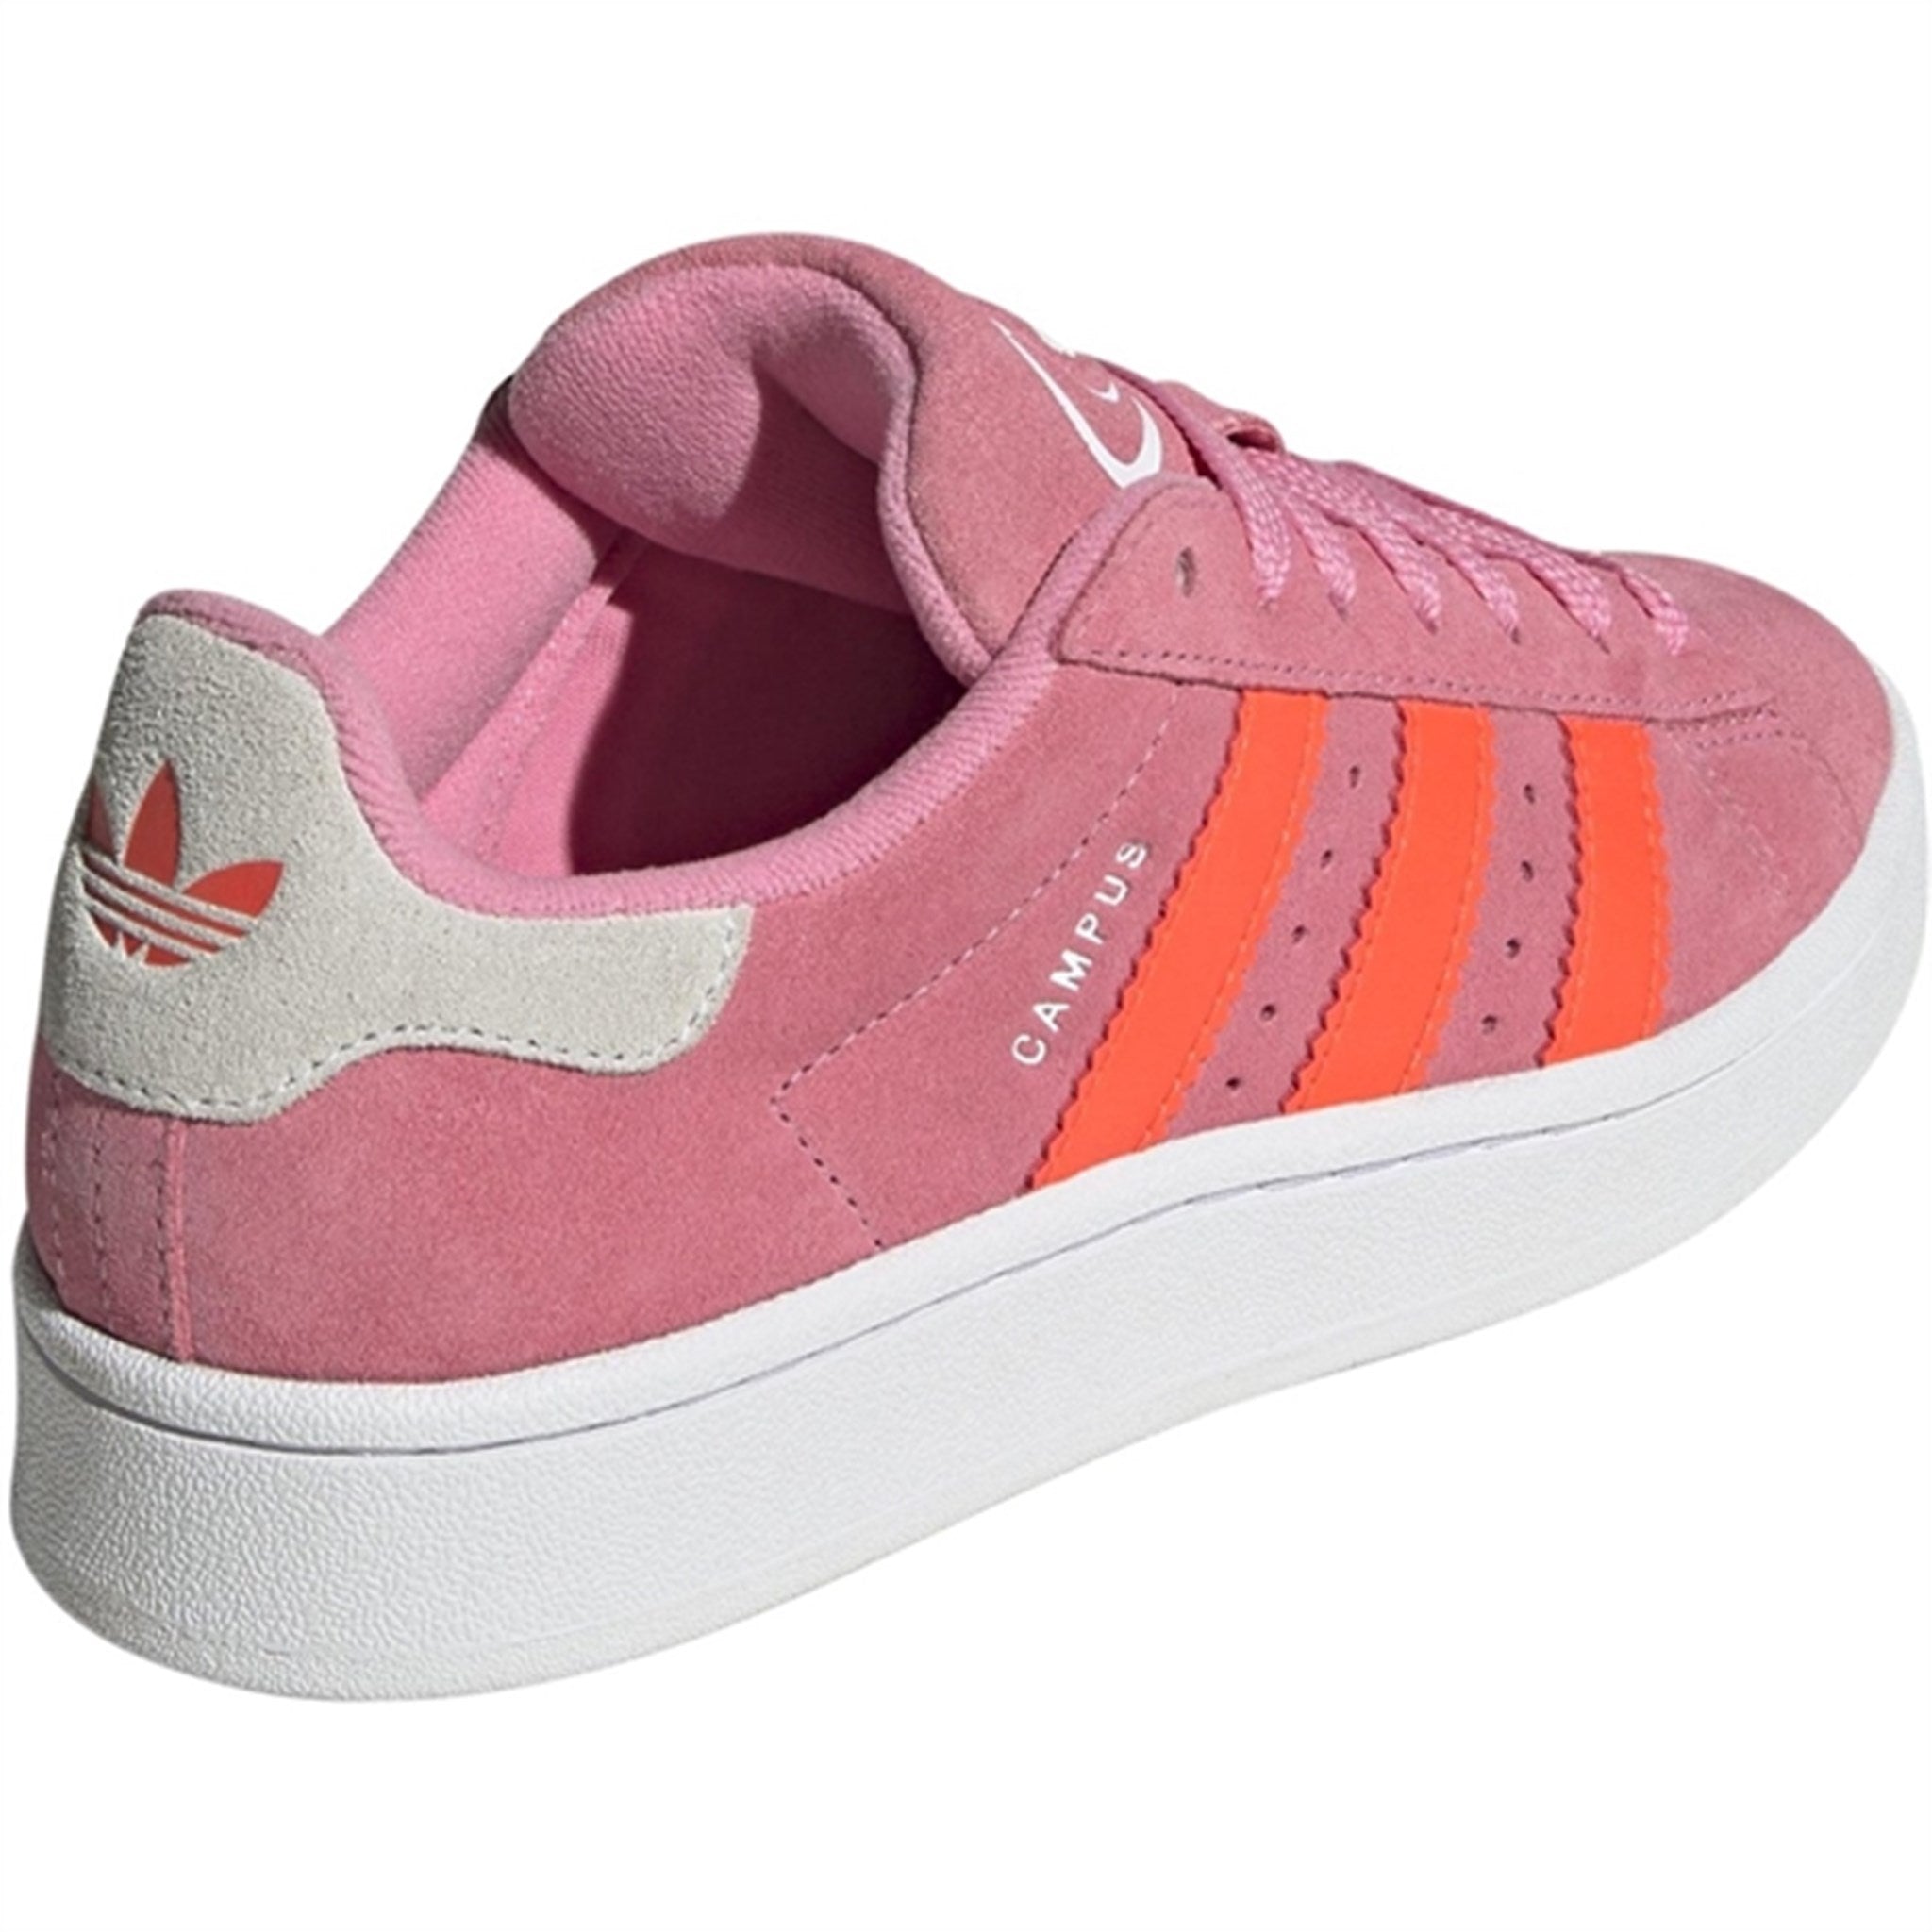 adidas Originals CAMPUS 00s J Sneakers Bliss Pink / Solar Red / Cloud White 4